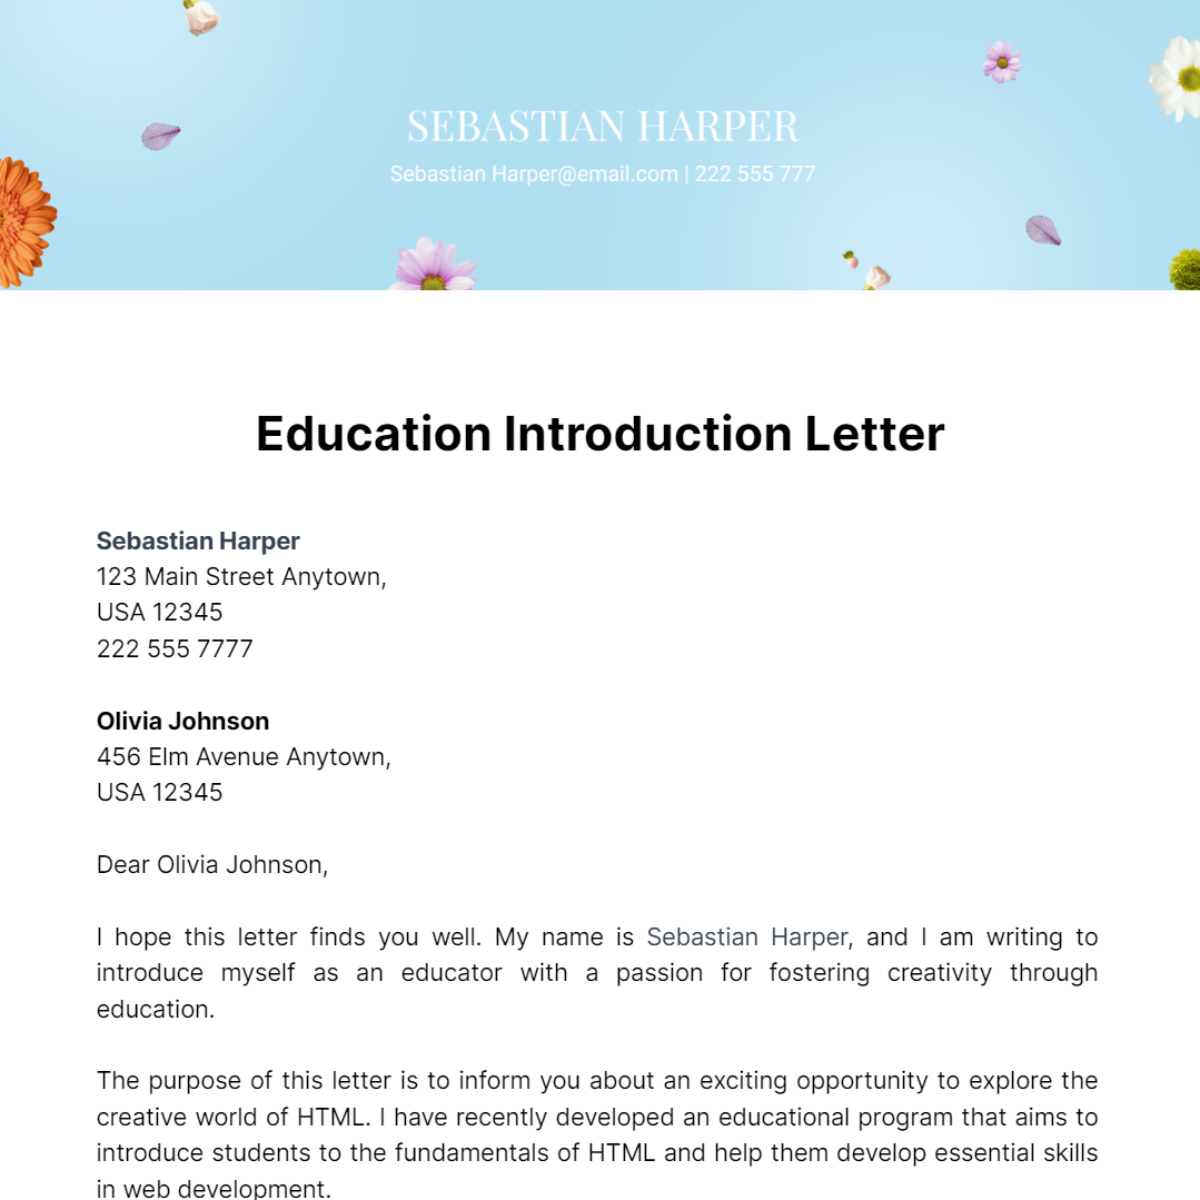 Education Introduction Letter Template